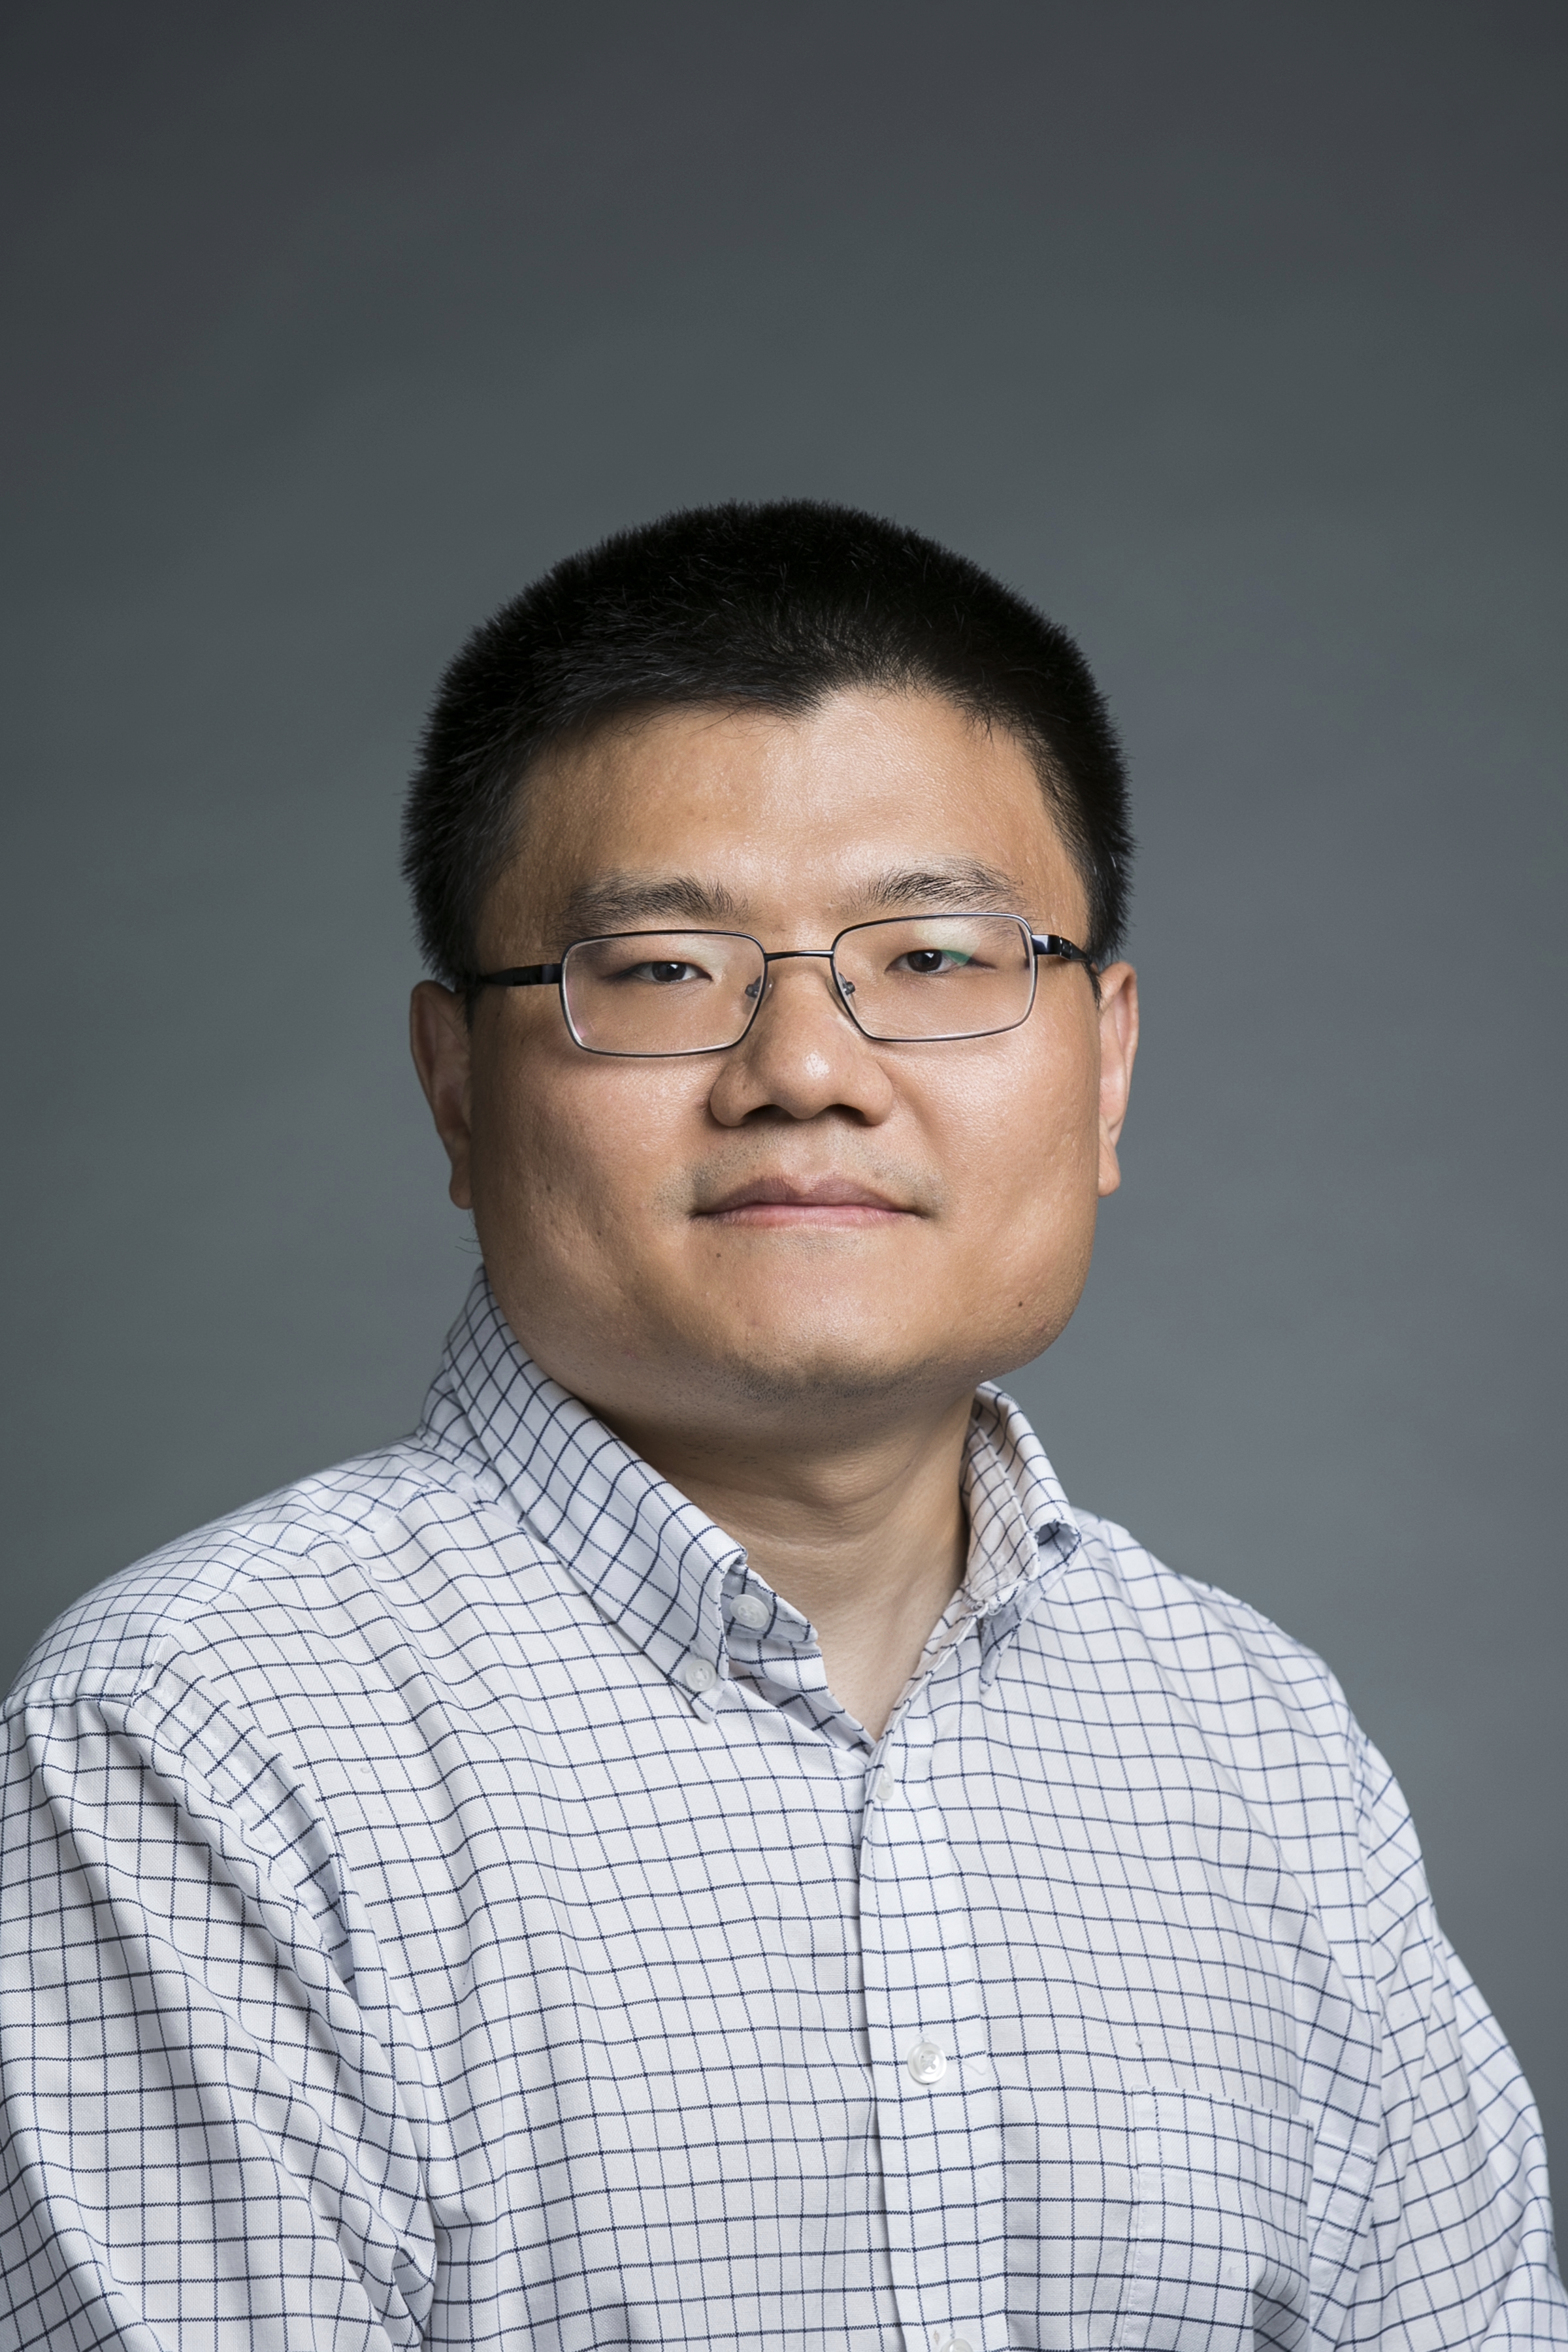 Wanli Qiao, Mason statistics professor, wears a light, long-sleeve shirt and glasses in his faculty profile